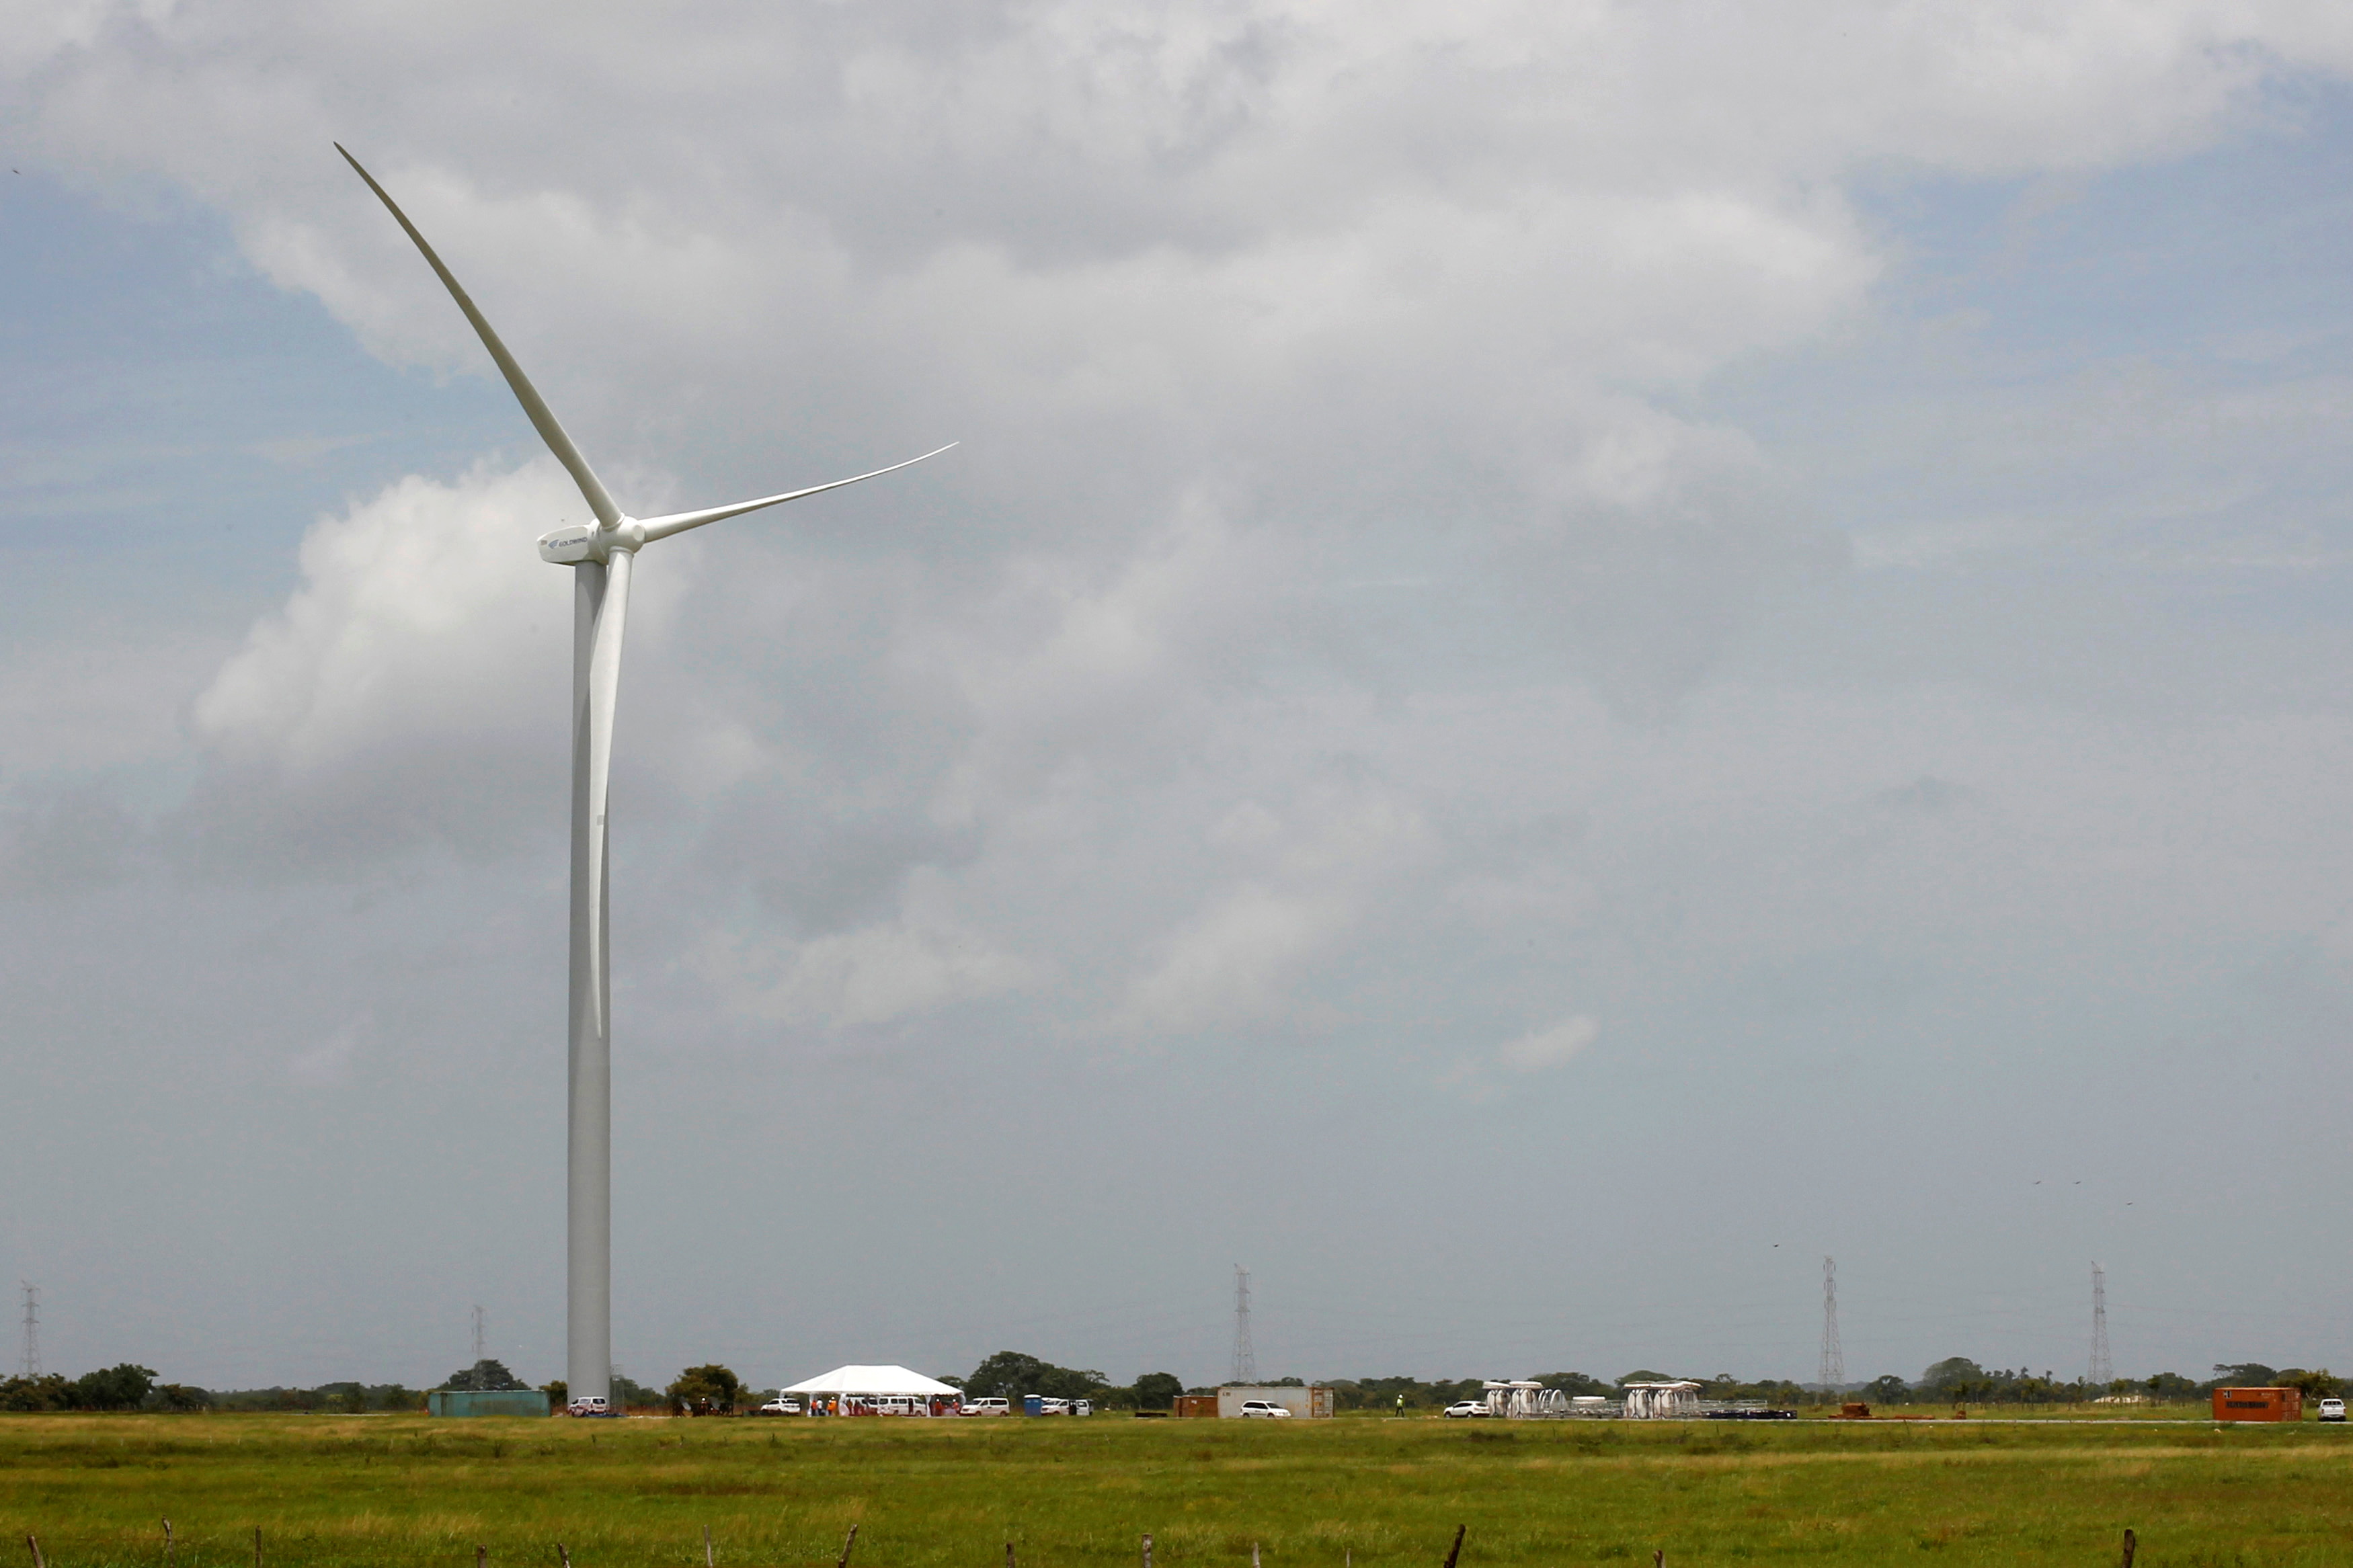 A wind turbine, the first of 88 installed at the Wind Power Park Eolico, is pictured in Penonome